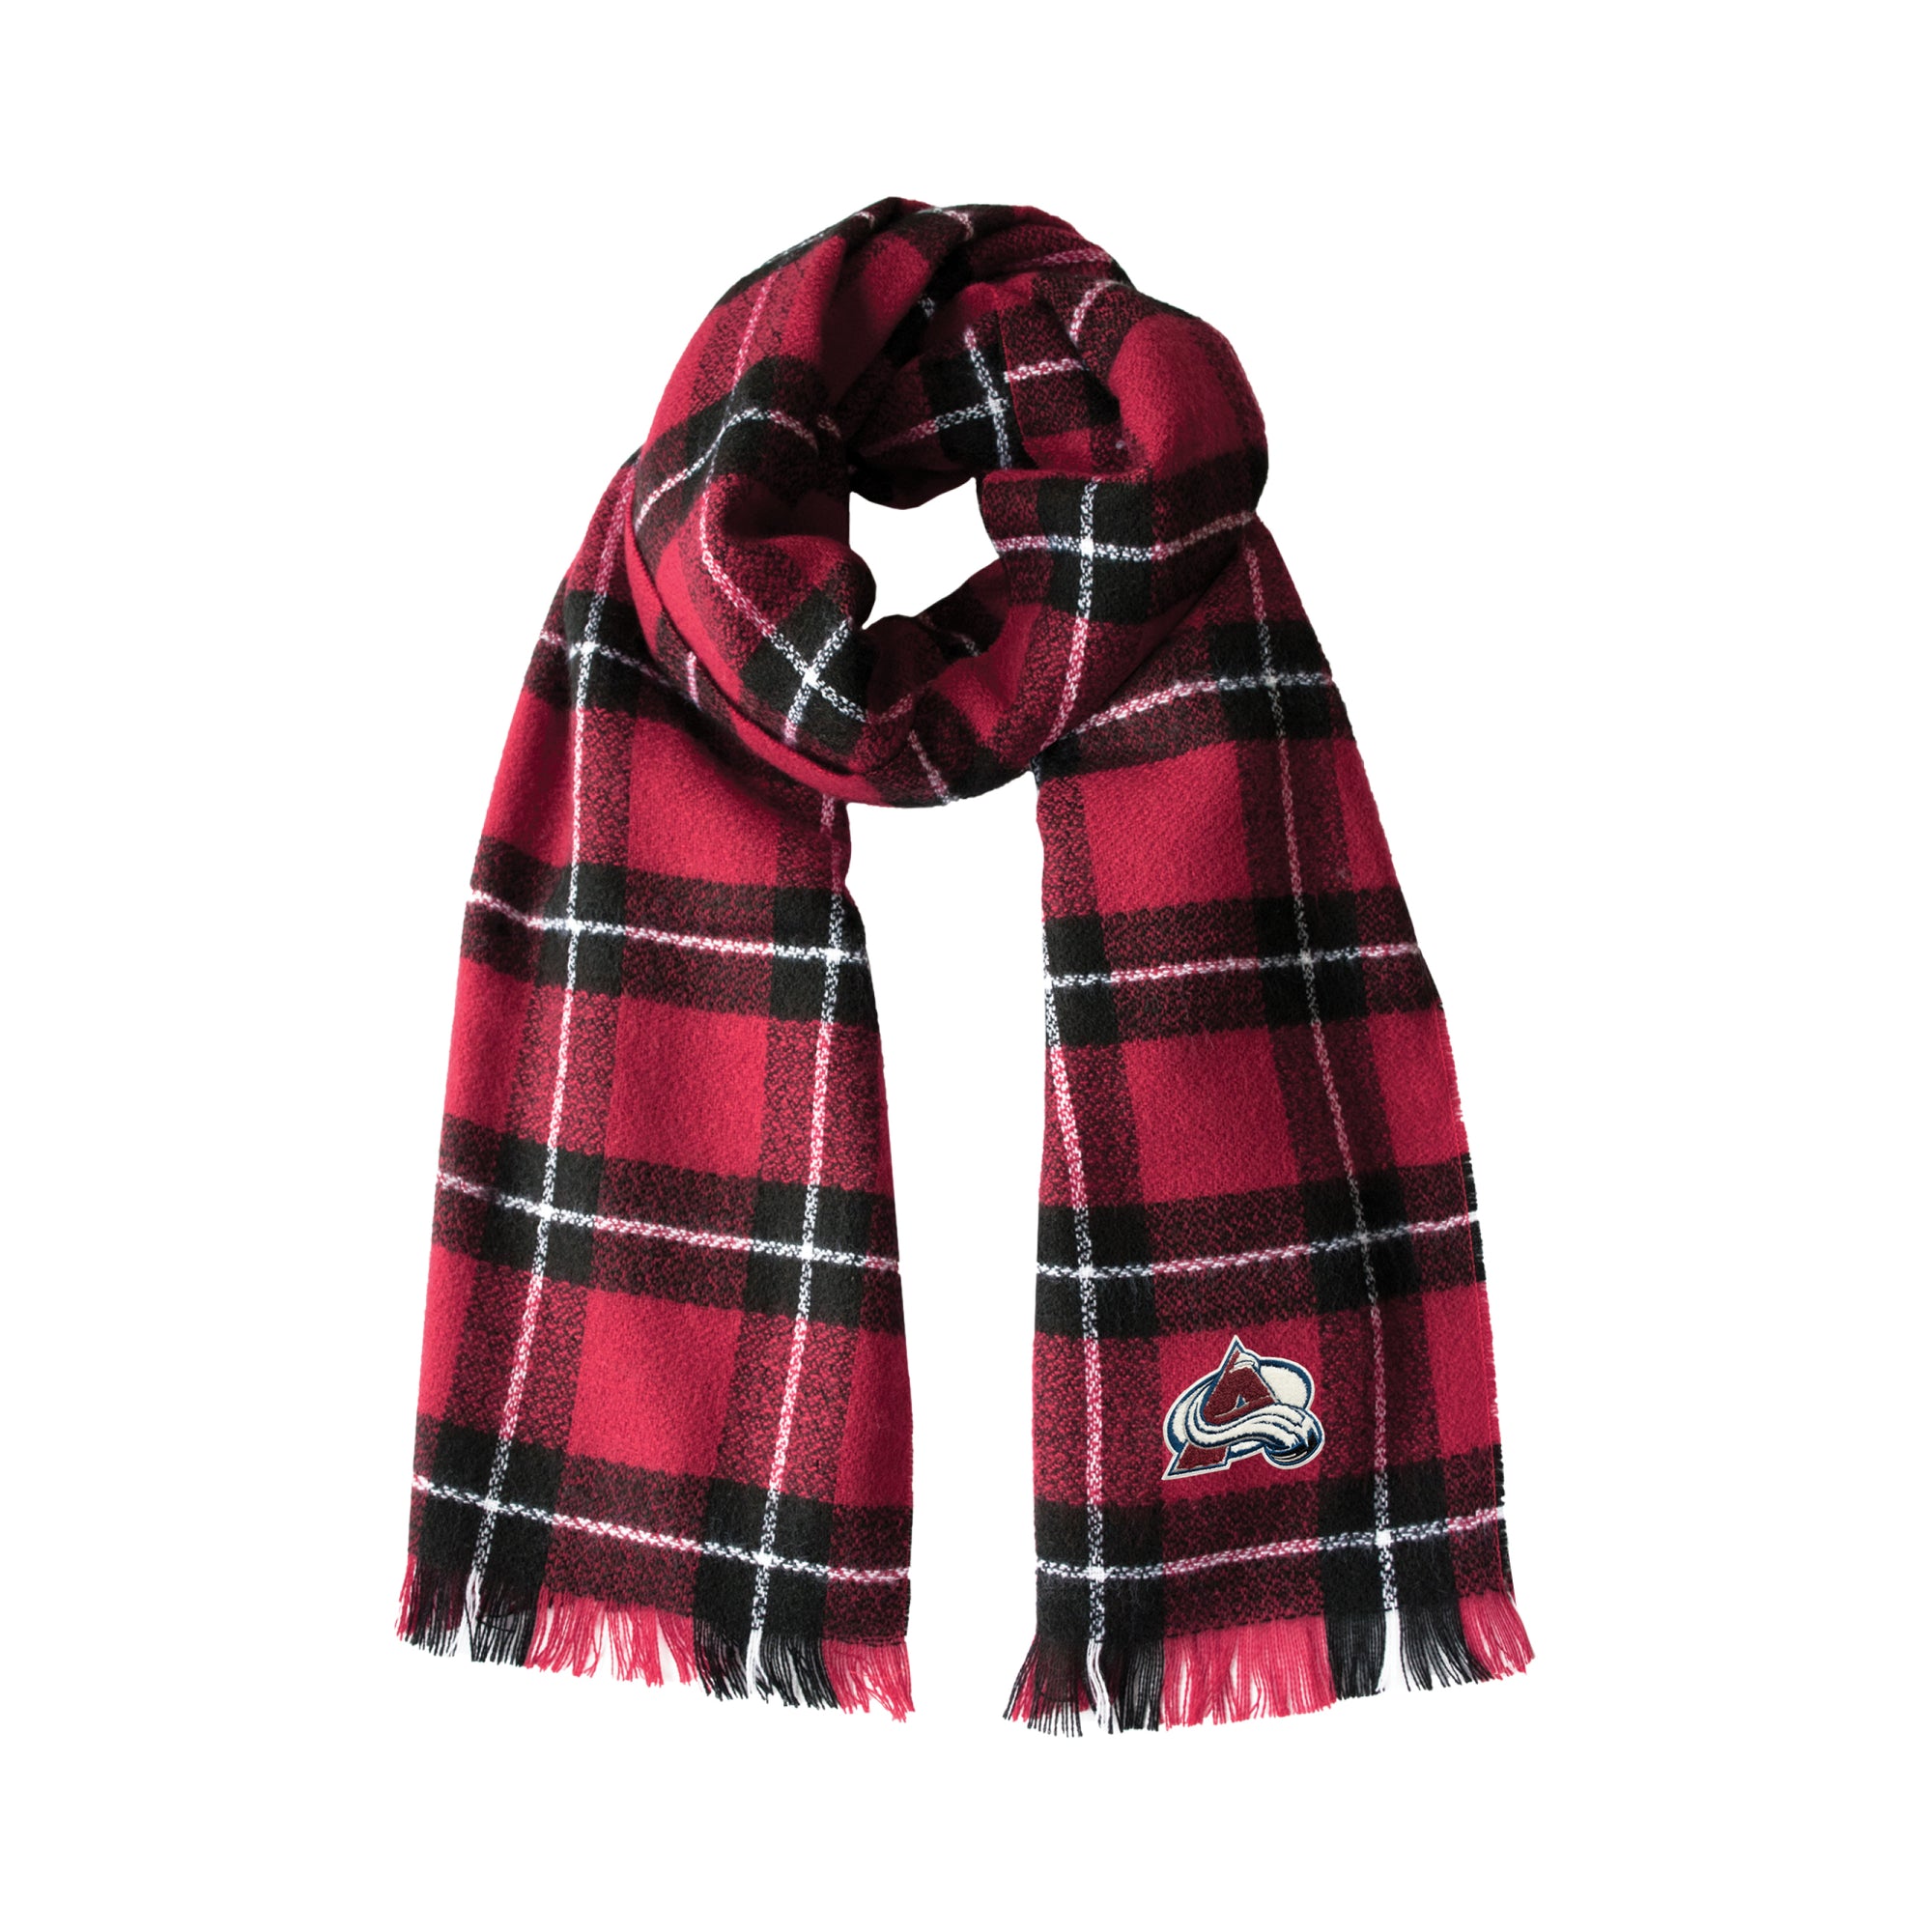 NWT Infinity Product University Of Louisville Cardinals Infinity Scarf Red  White